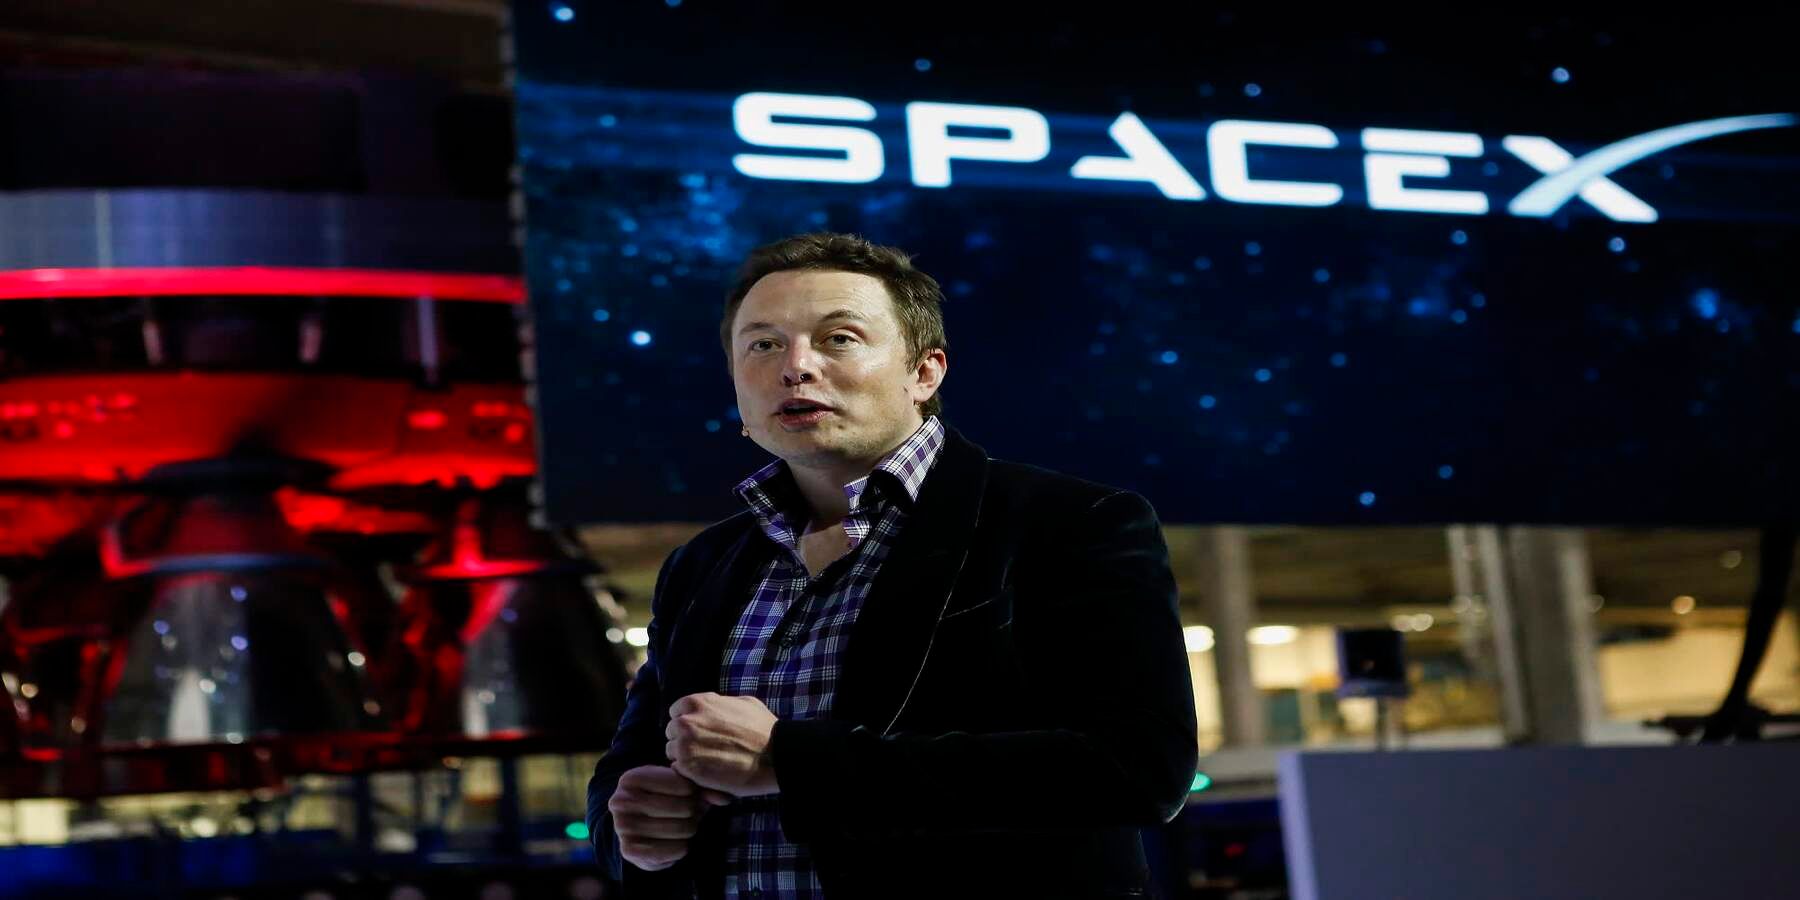 Trial for Lawsuit Between Twitter and Elon Musk Set to Start in October